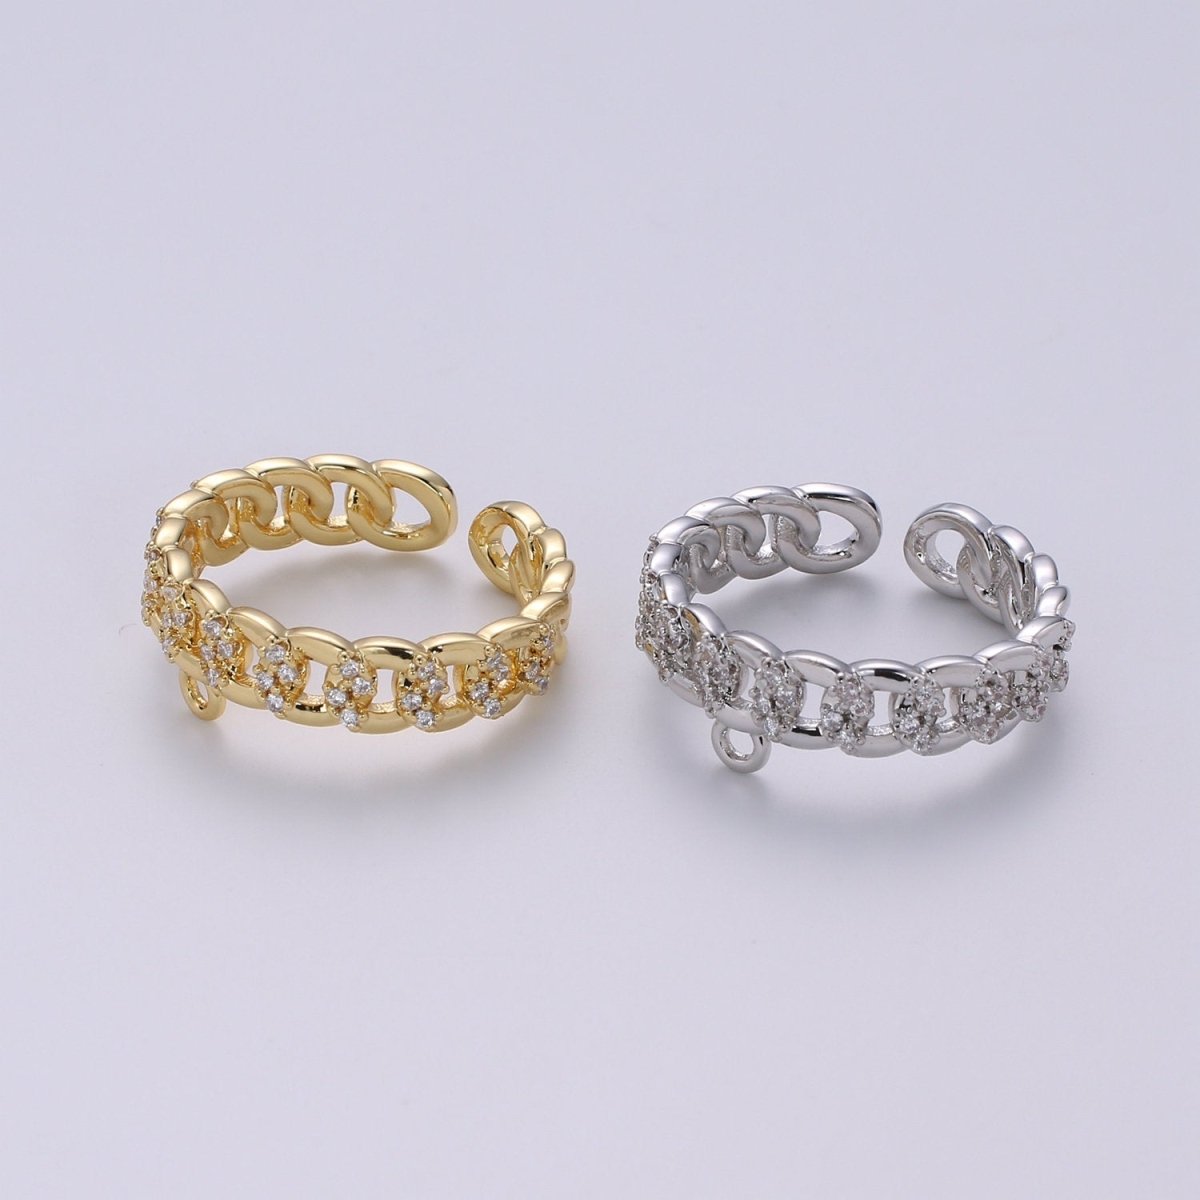 24k Gold Vermeil Open Link Ring, Cz Gold Chain Link Ring, Link Chain Design Ring, Make Your Own Ring DIY Jewelry Supplies Put your own Charm K-859 K-860 - DLUXCA